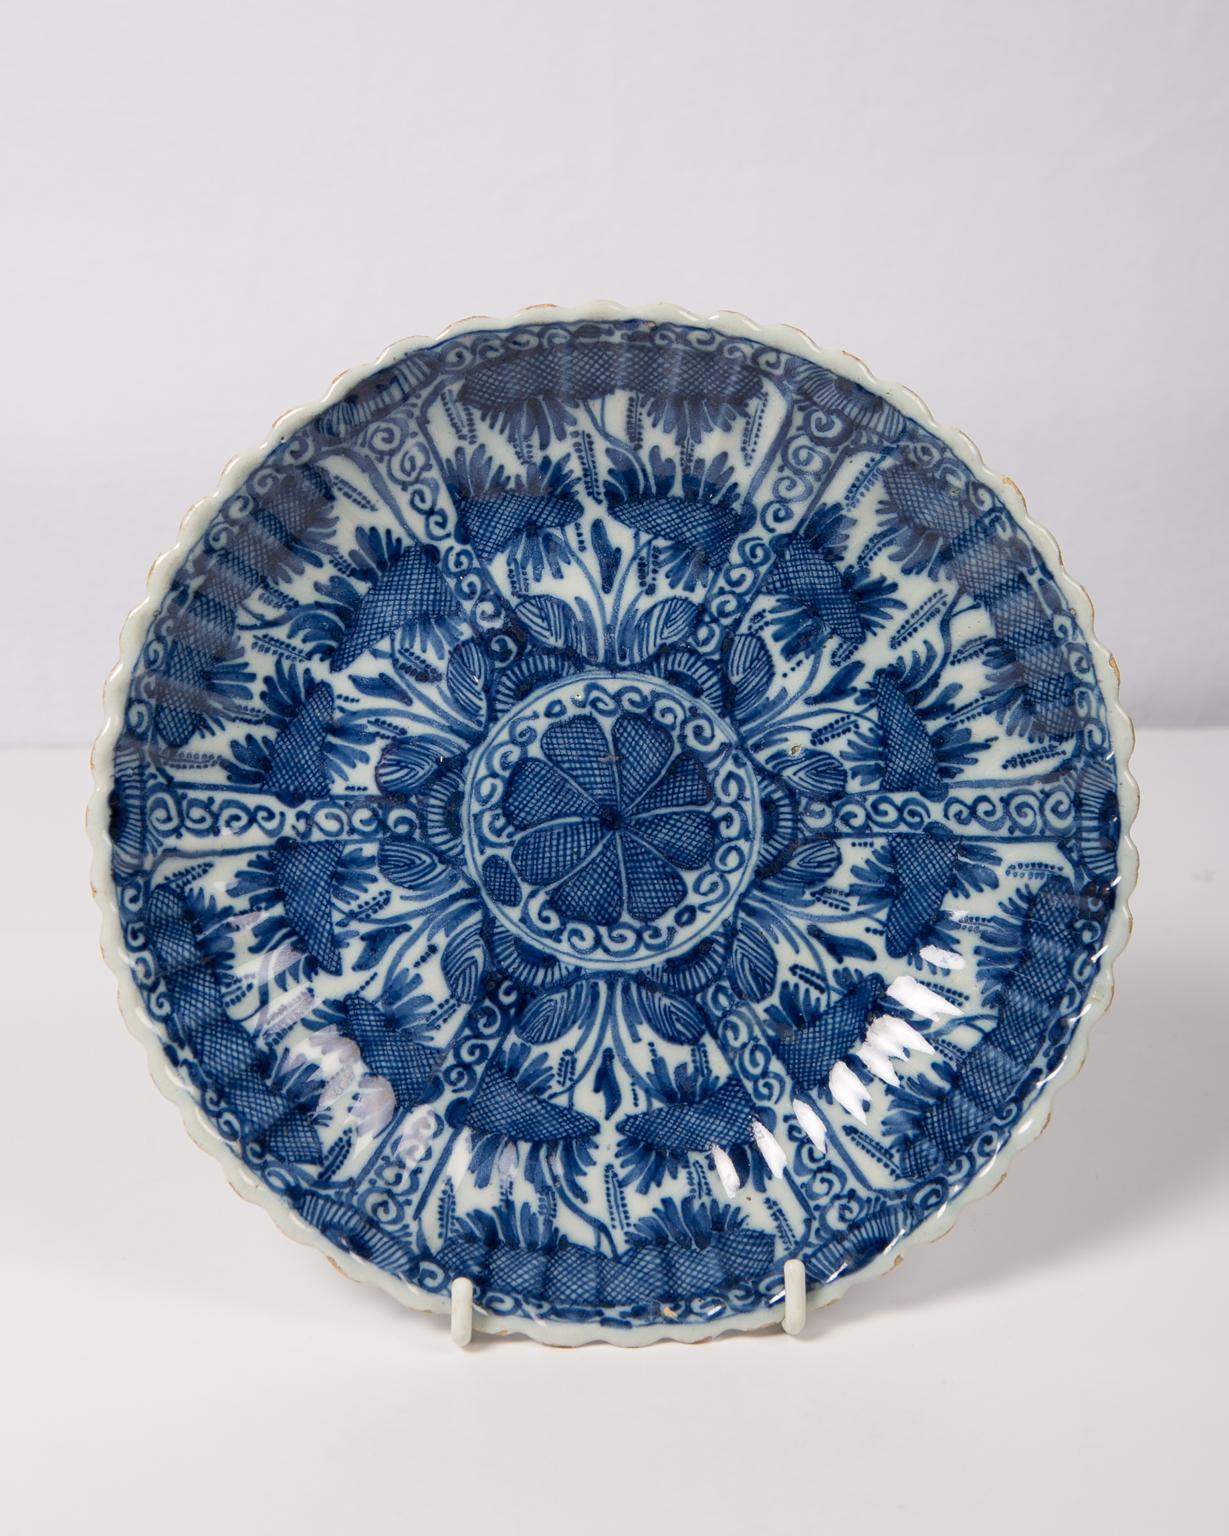 Hand-Painted Antique Delft Blue and White Dish with Fluting and a Scalloped Edge circa 1780